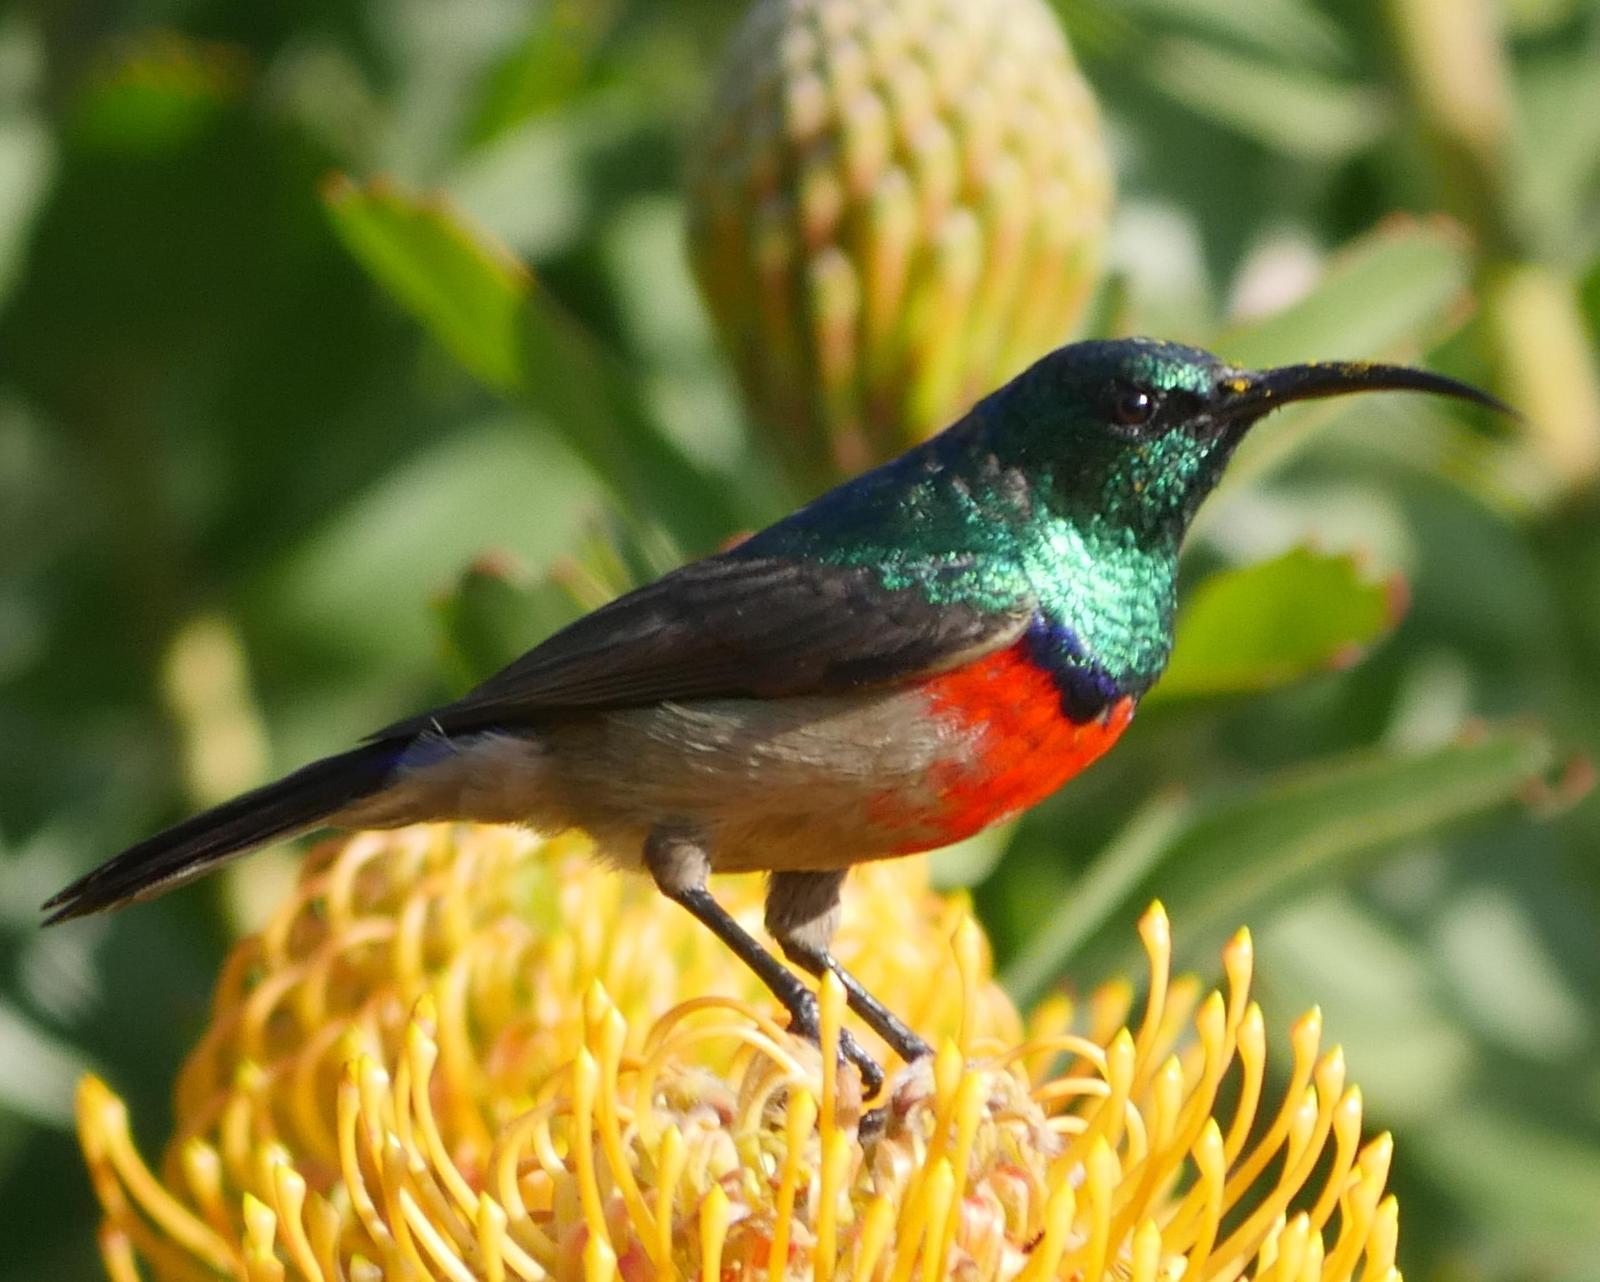 Greater Double-collared Sunbird Photo by Peter Lowe